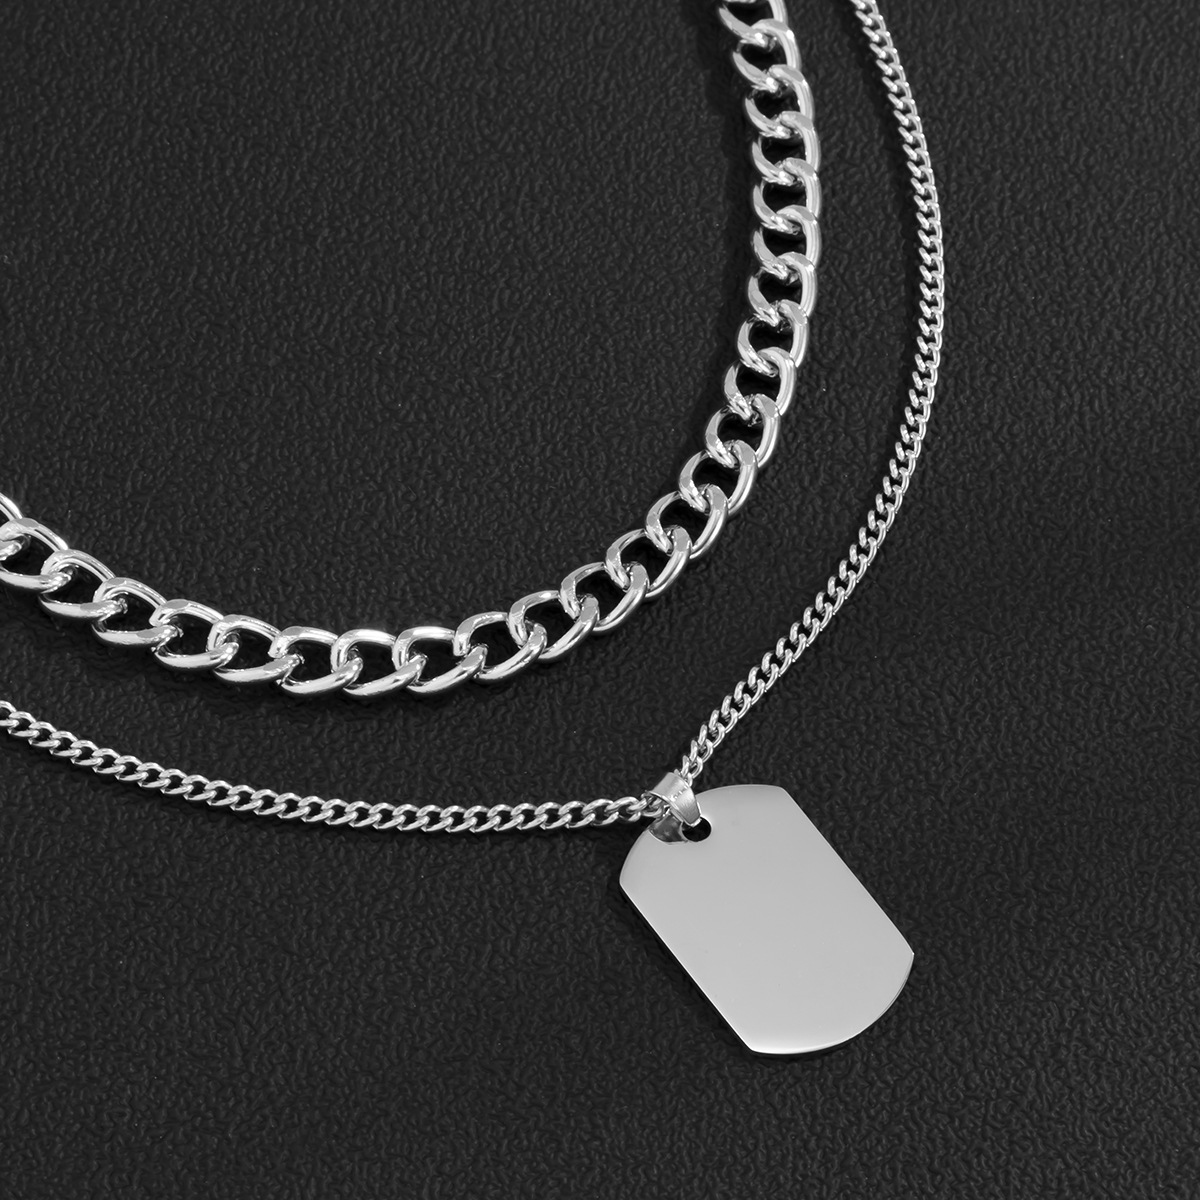 Hiphop titanium steel smooth military brand necklace jewelry punk style sweater chain multilayer geometric necklacepicture6